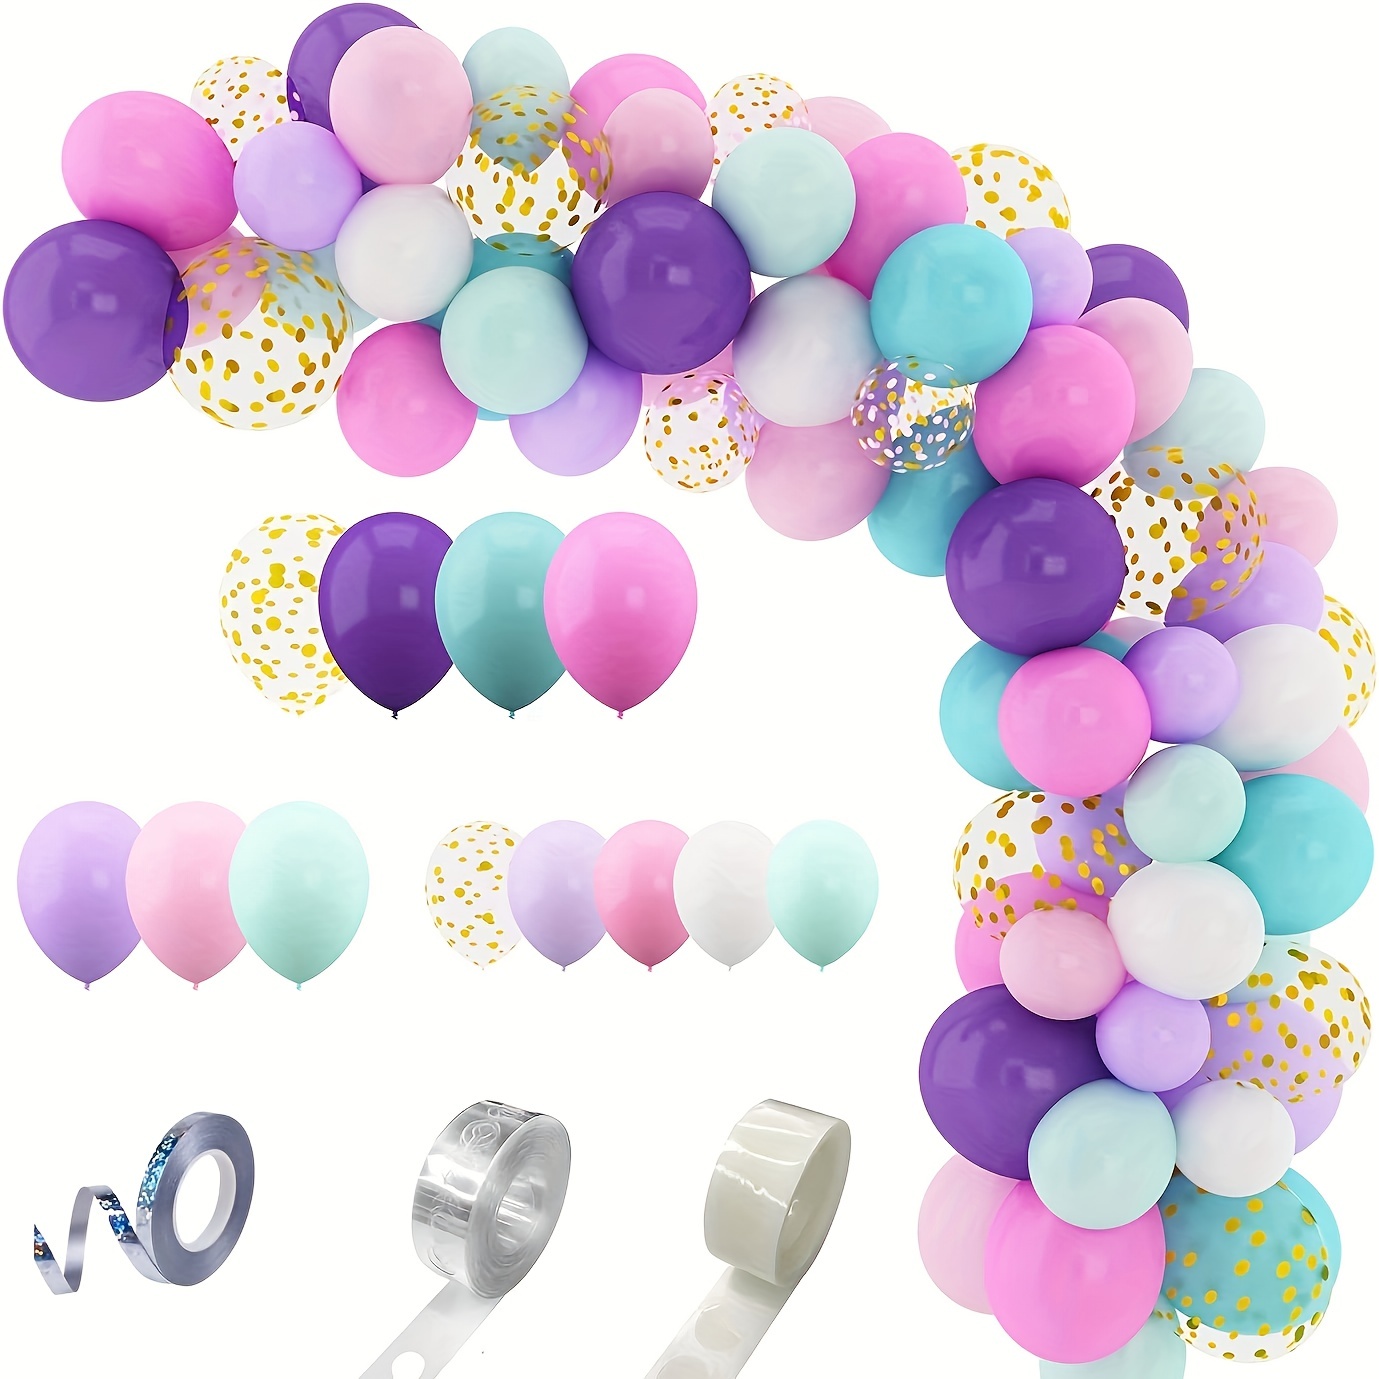 

160pcs, Cute Balloons Arch Garland Kit, Pink Purple Aqua Blue Confetti Latex Balloons For Cute Birthday Decorations For Girls Wedding Baby Shower Party Supplies